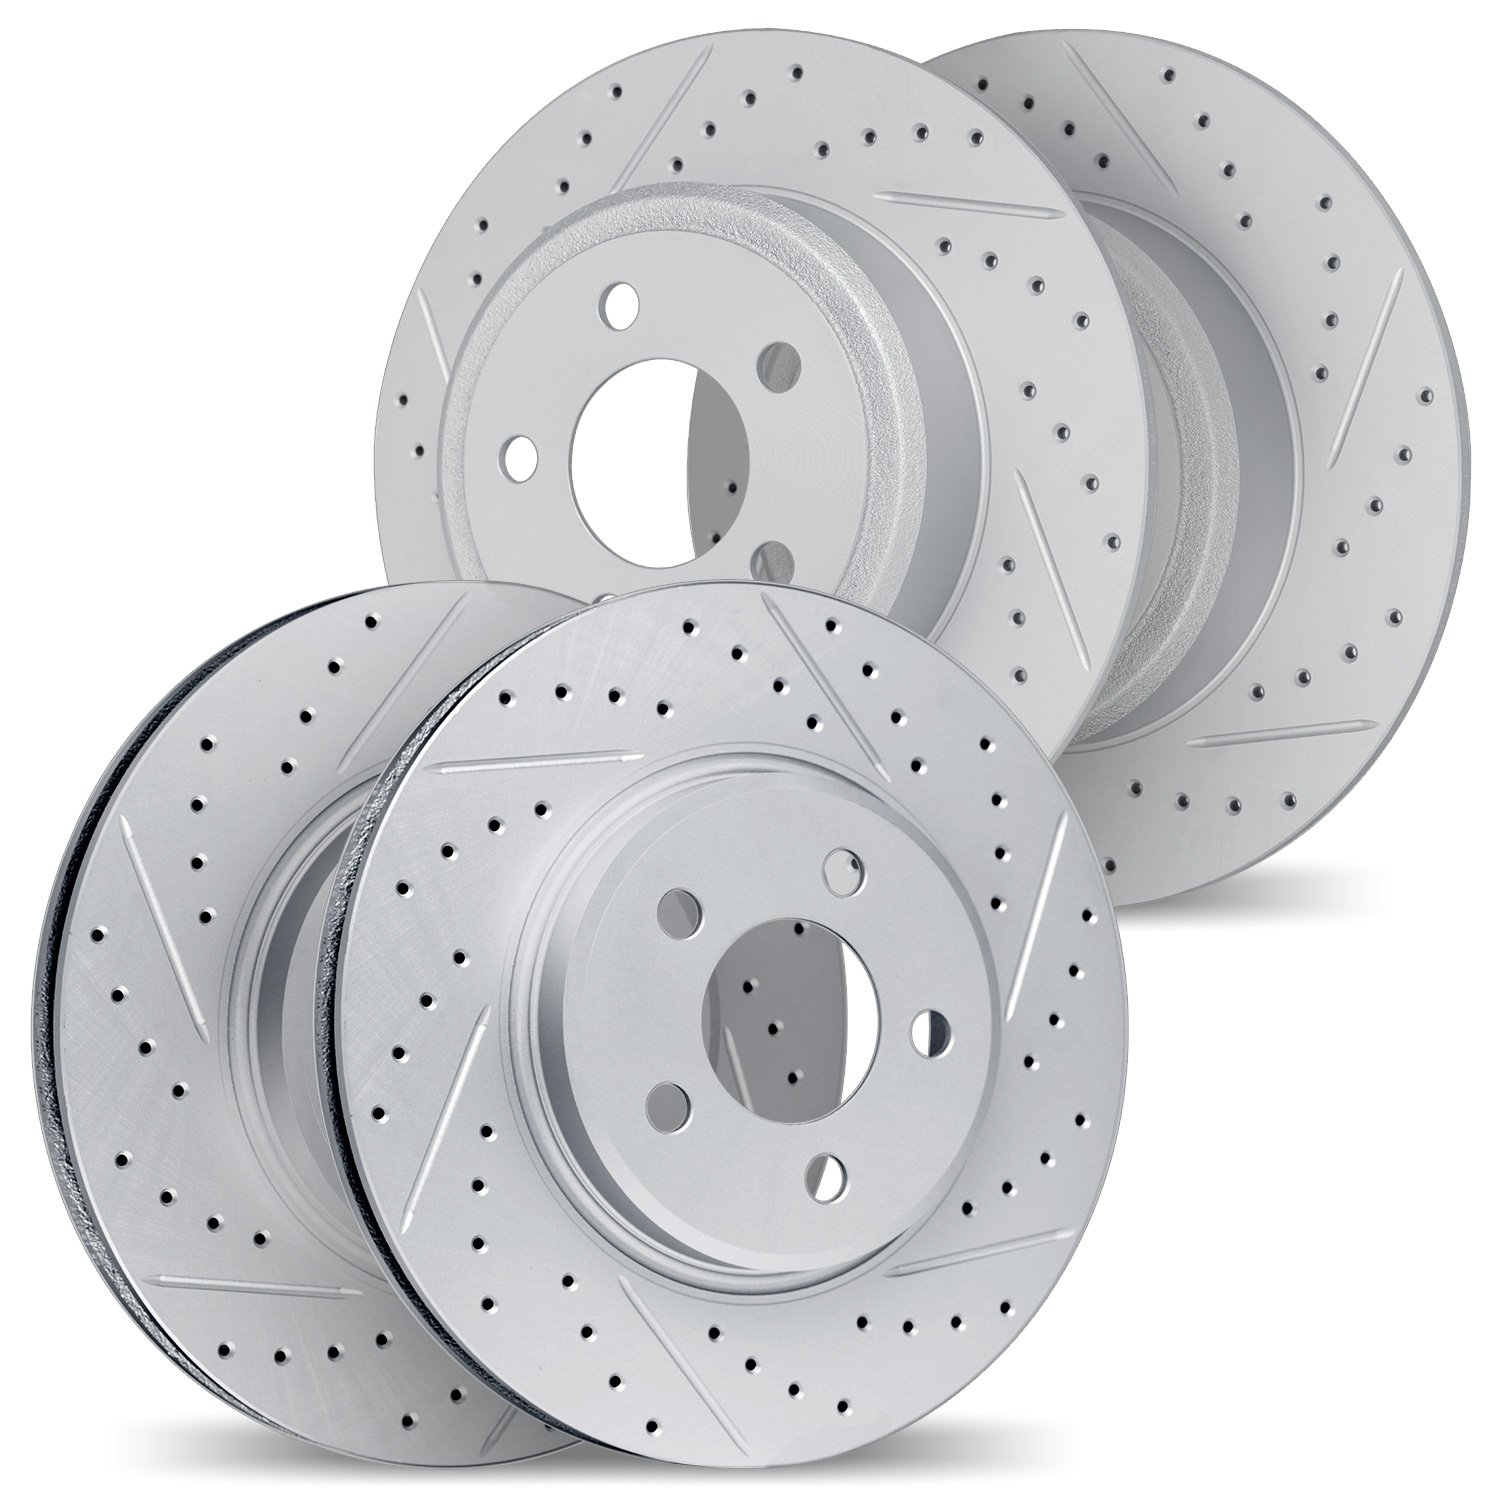 2004-67026 Geoperformance Drilled/Slotted Brake Rotors, 2002-2006 Infiniti/Nissan, Position: Front and Rear